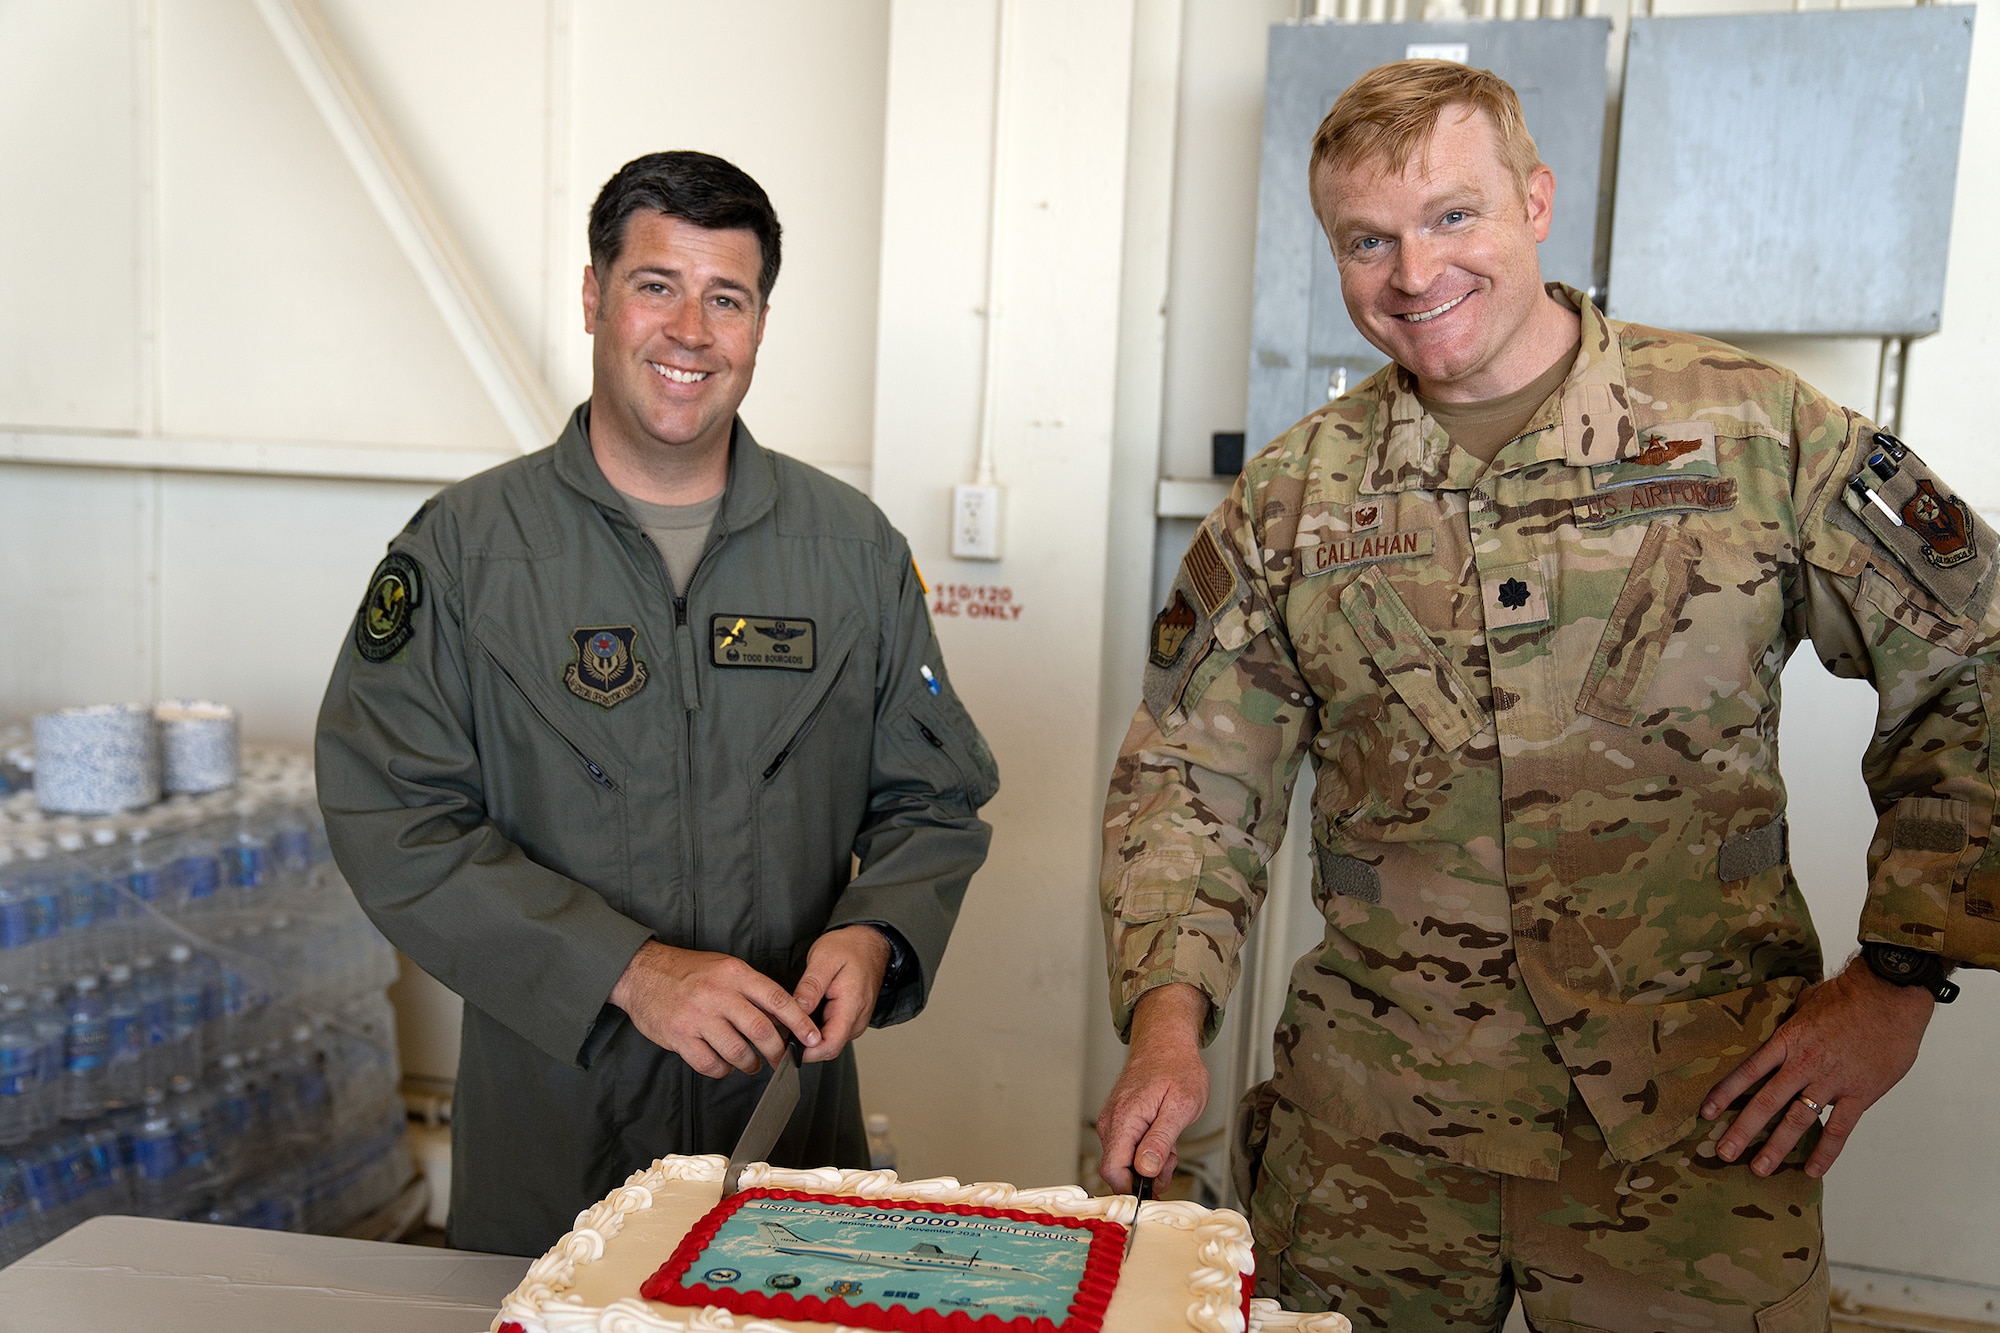 Two men in military uniform slice a decorated cake